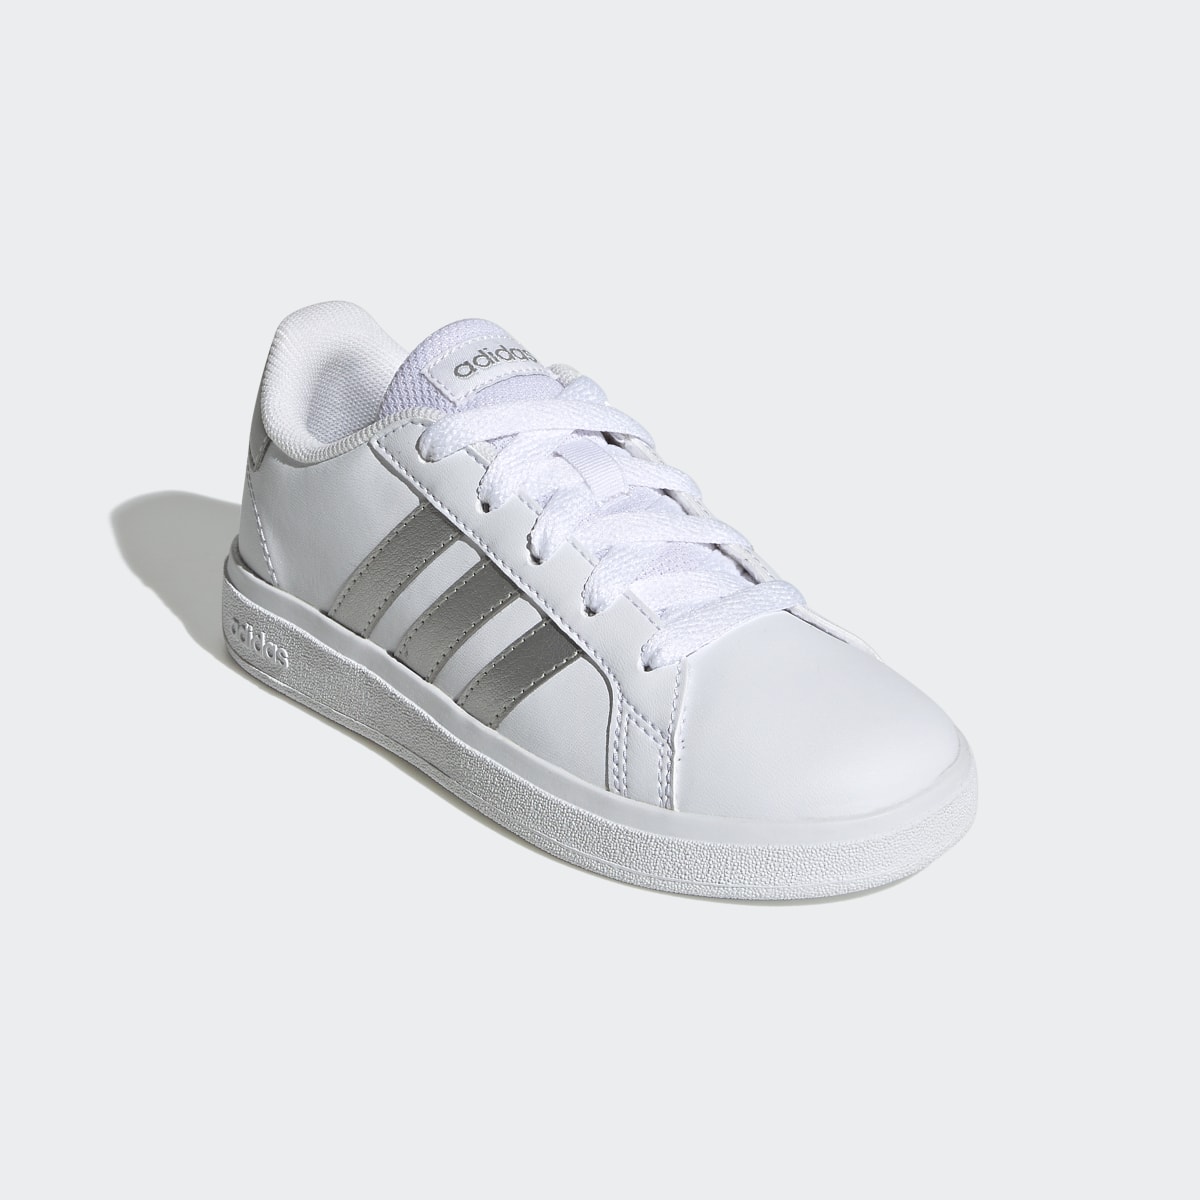 Adidas Buty Grand Court Lifestyle Tennis Lace-Up. 5